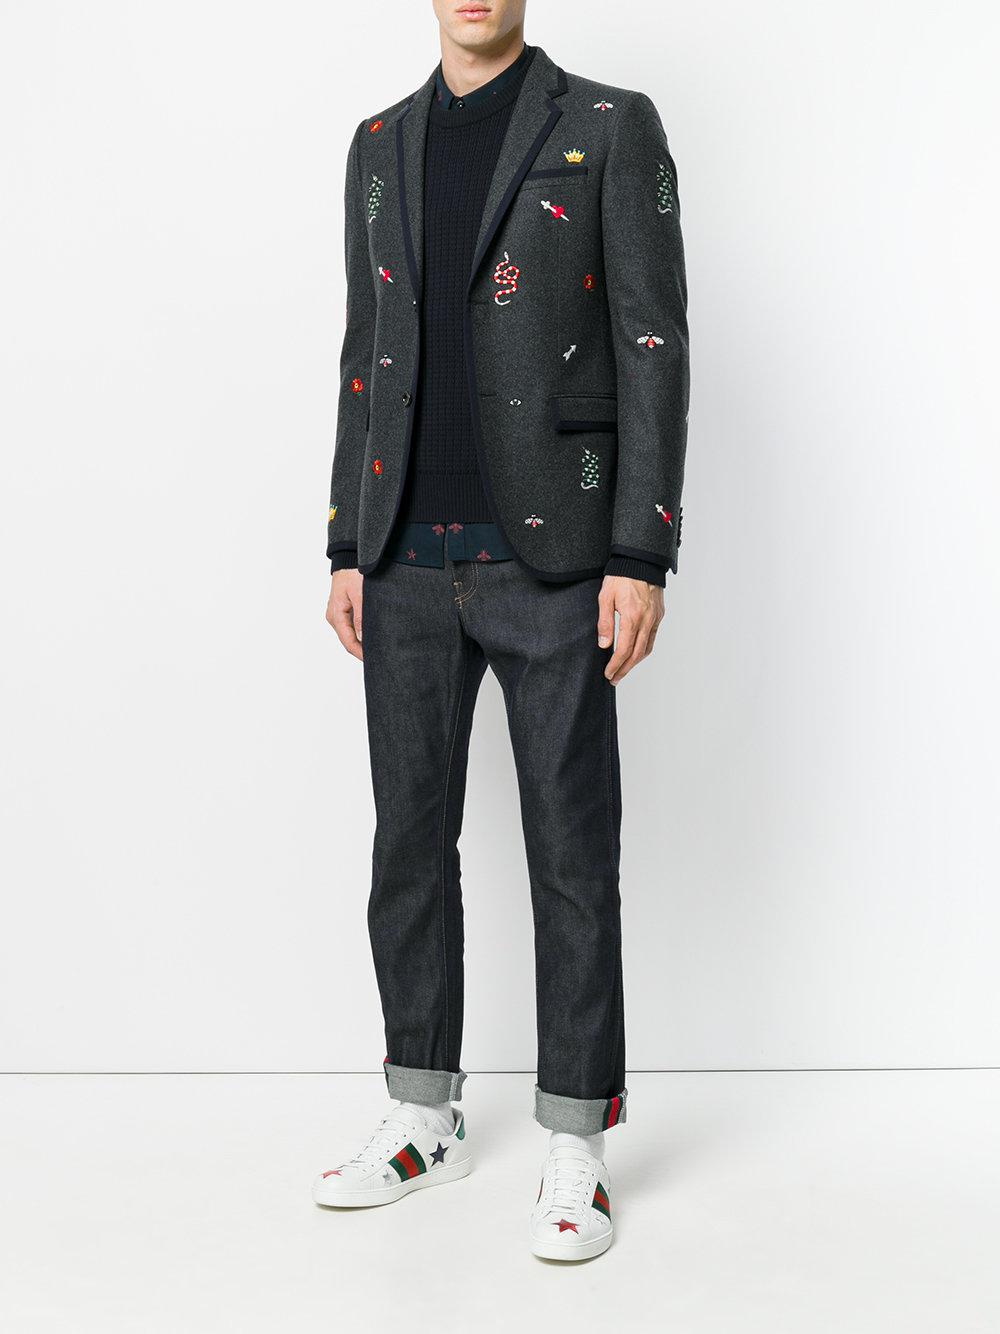 Lyst - Gucci Embroidered Monaco Jacket in Gray for Men